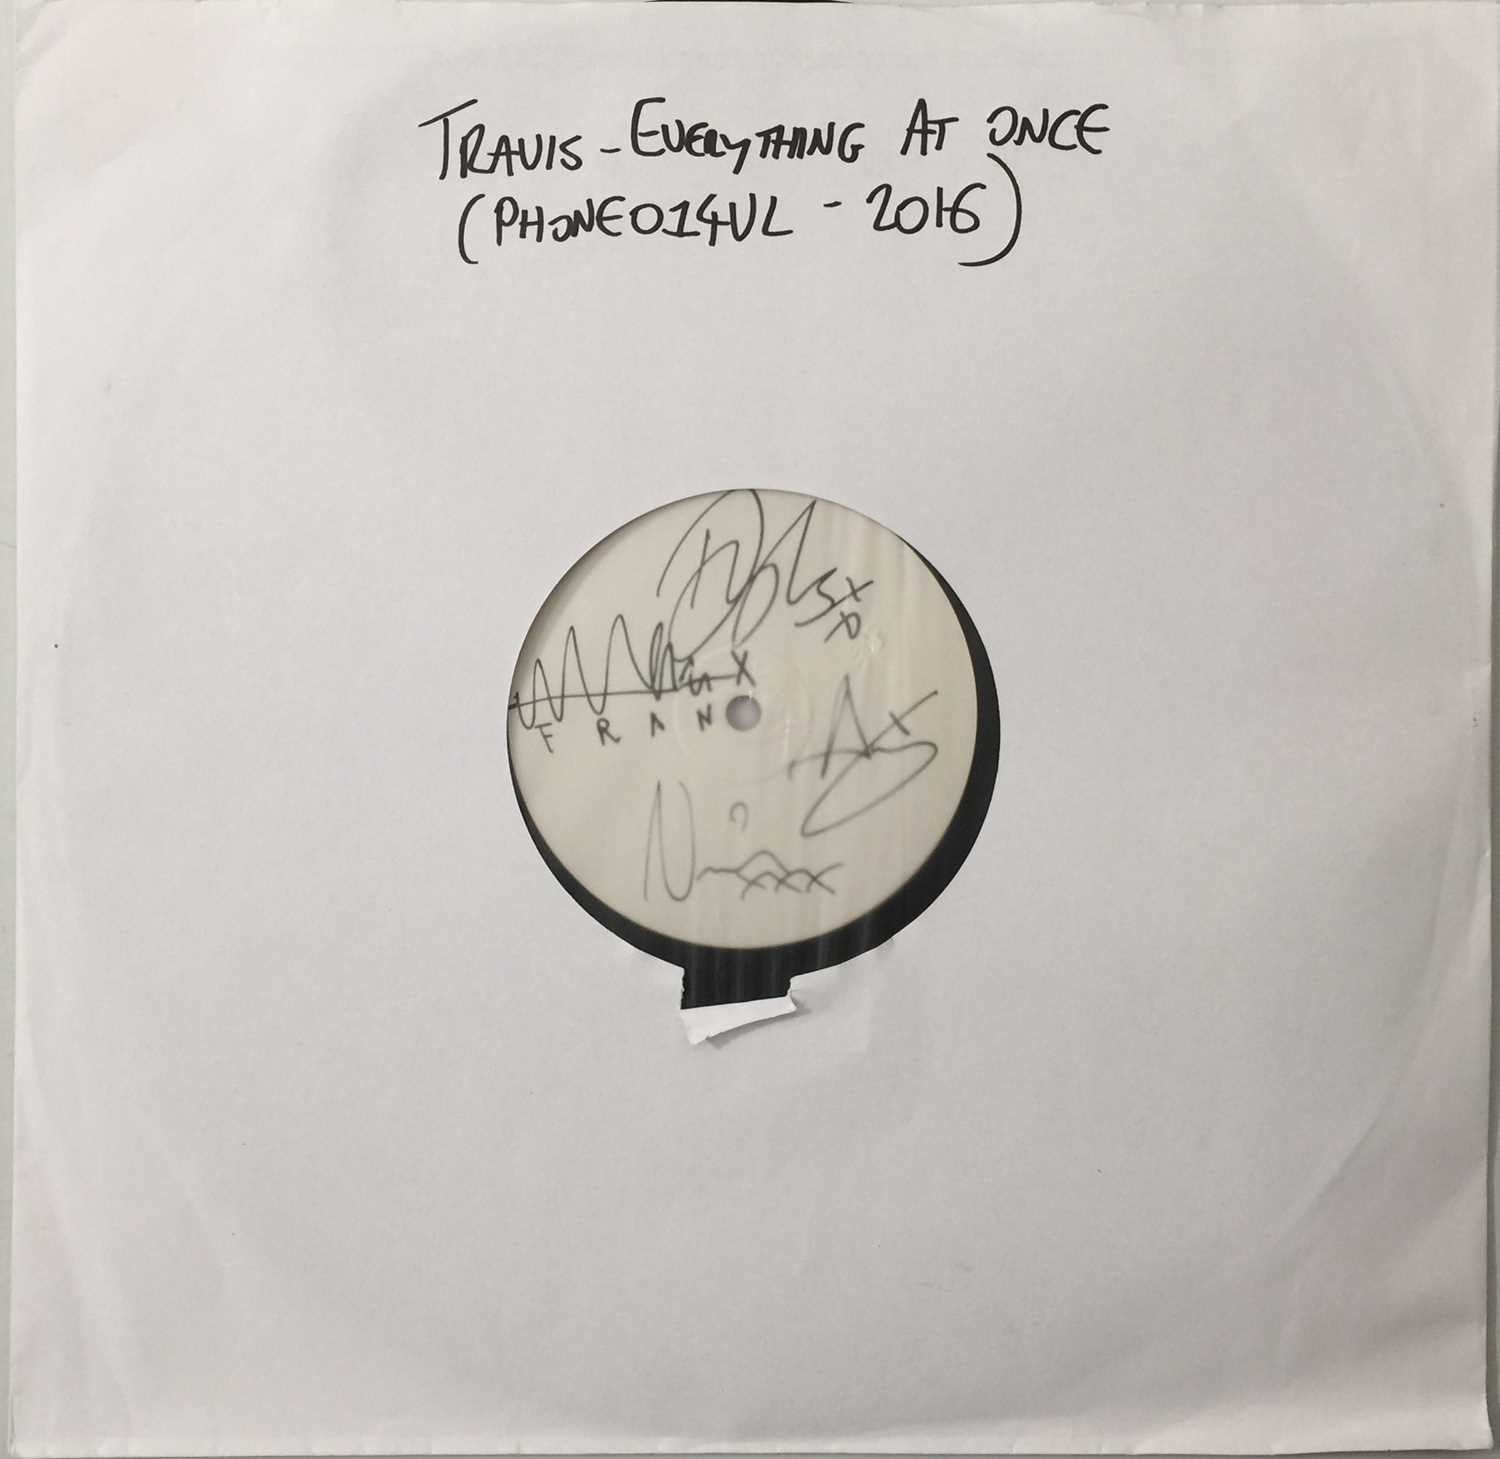 Lot 22 - TRAVIS - EVERYTHING AT ONCE (2016 SIGNED WHITE LABEL LP - PHONE014VL)